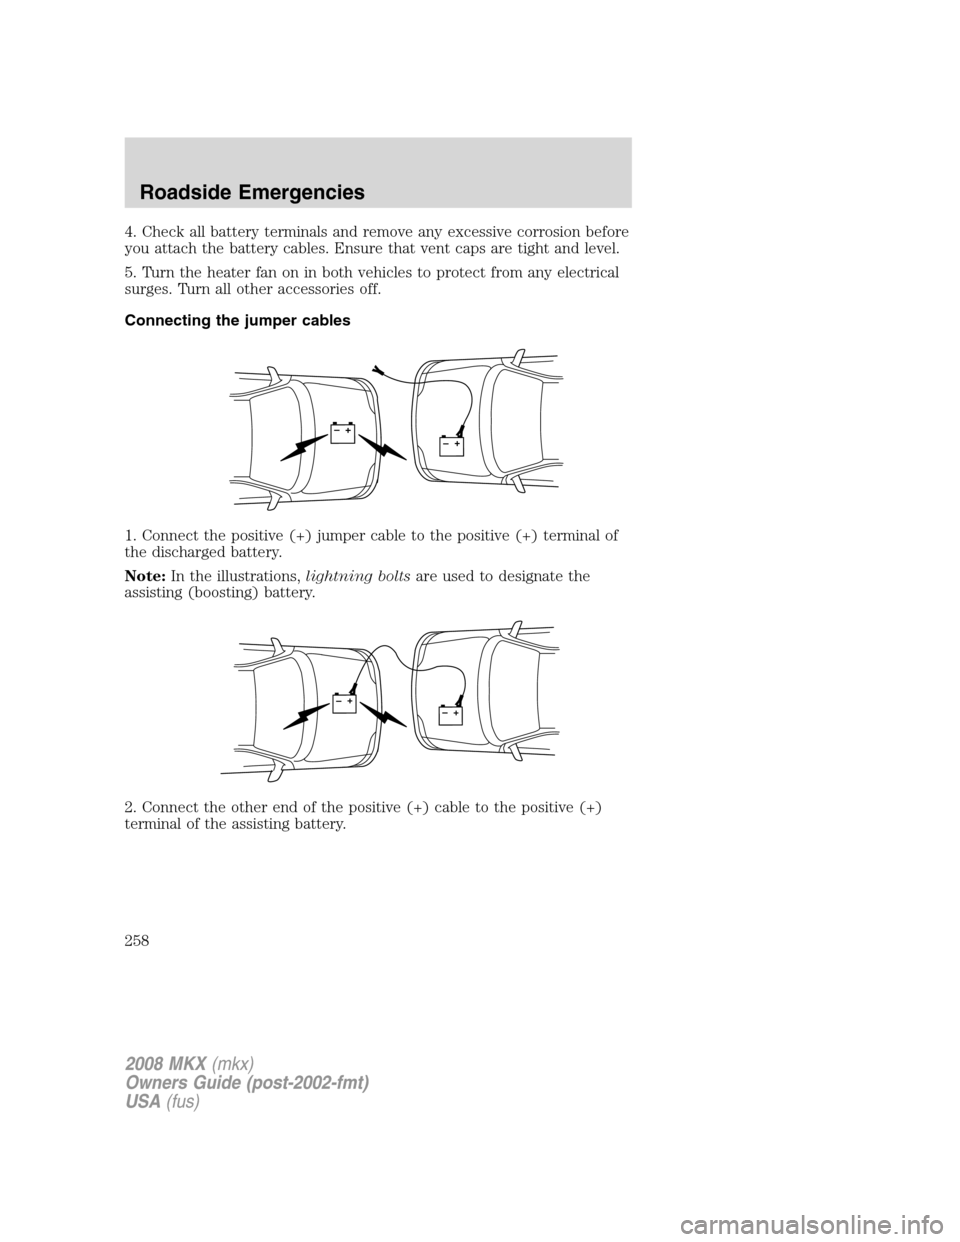 LINCOLN MKX 2008  Owners Manual 4. Check all battery terminals and remove any excessive corrosion before
you attach the battery cables. Ensure that vent caps are tight and level.
5. Turn the heater fan on in both vehicles to protect